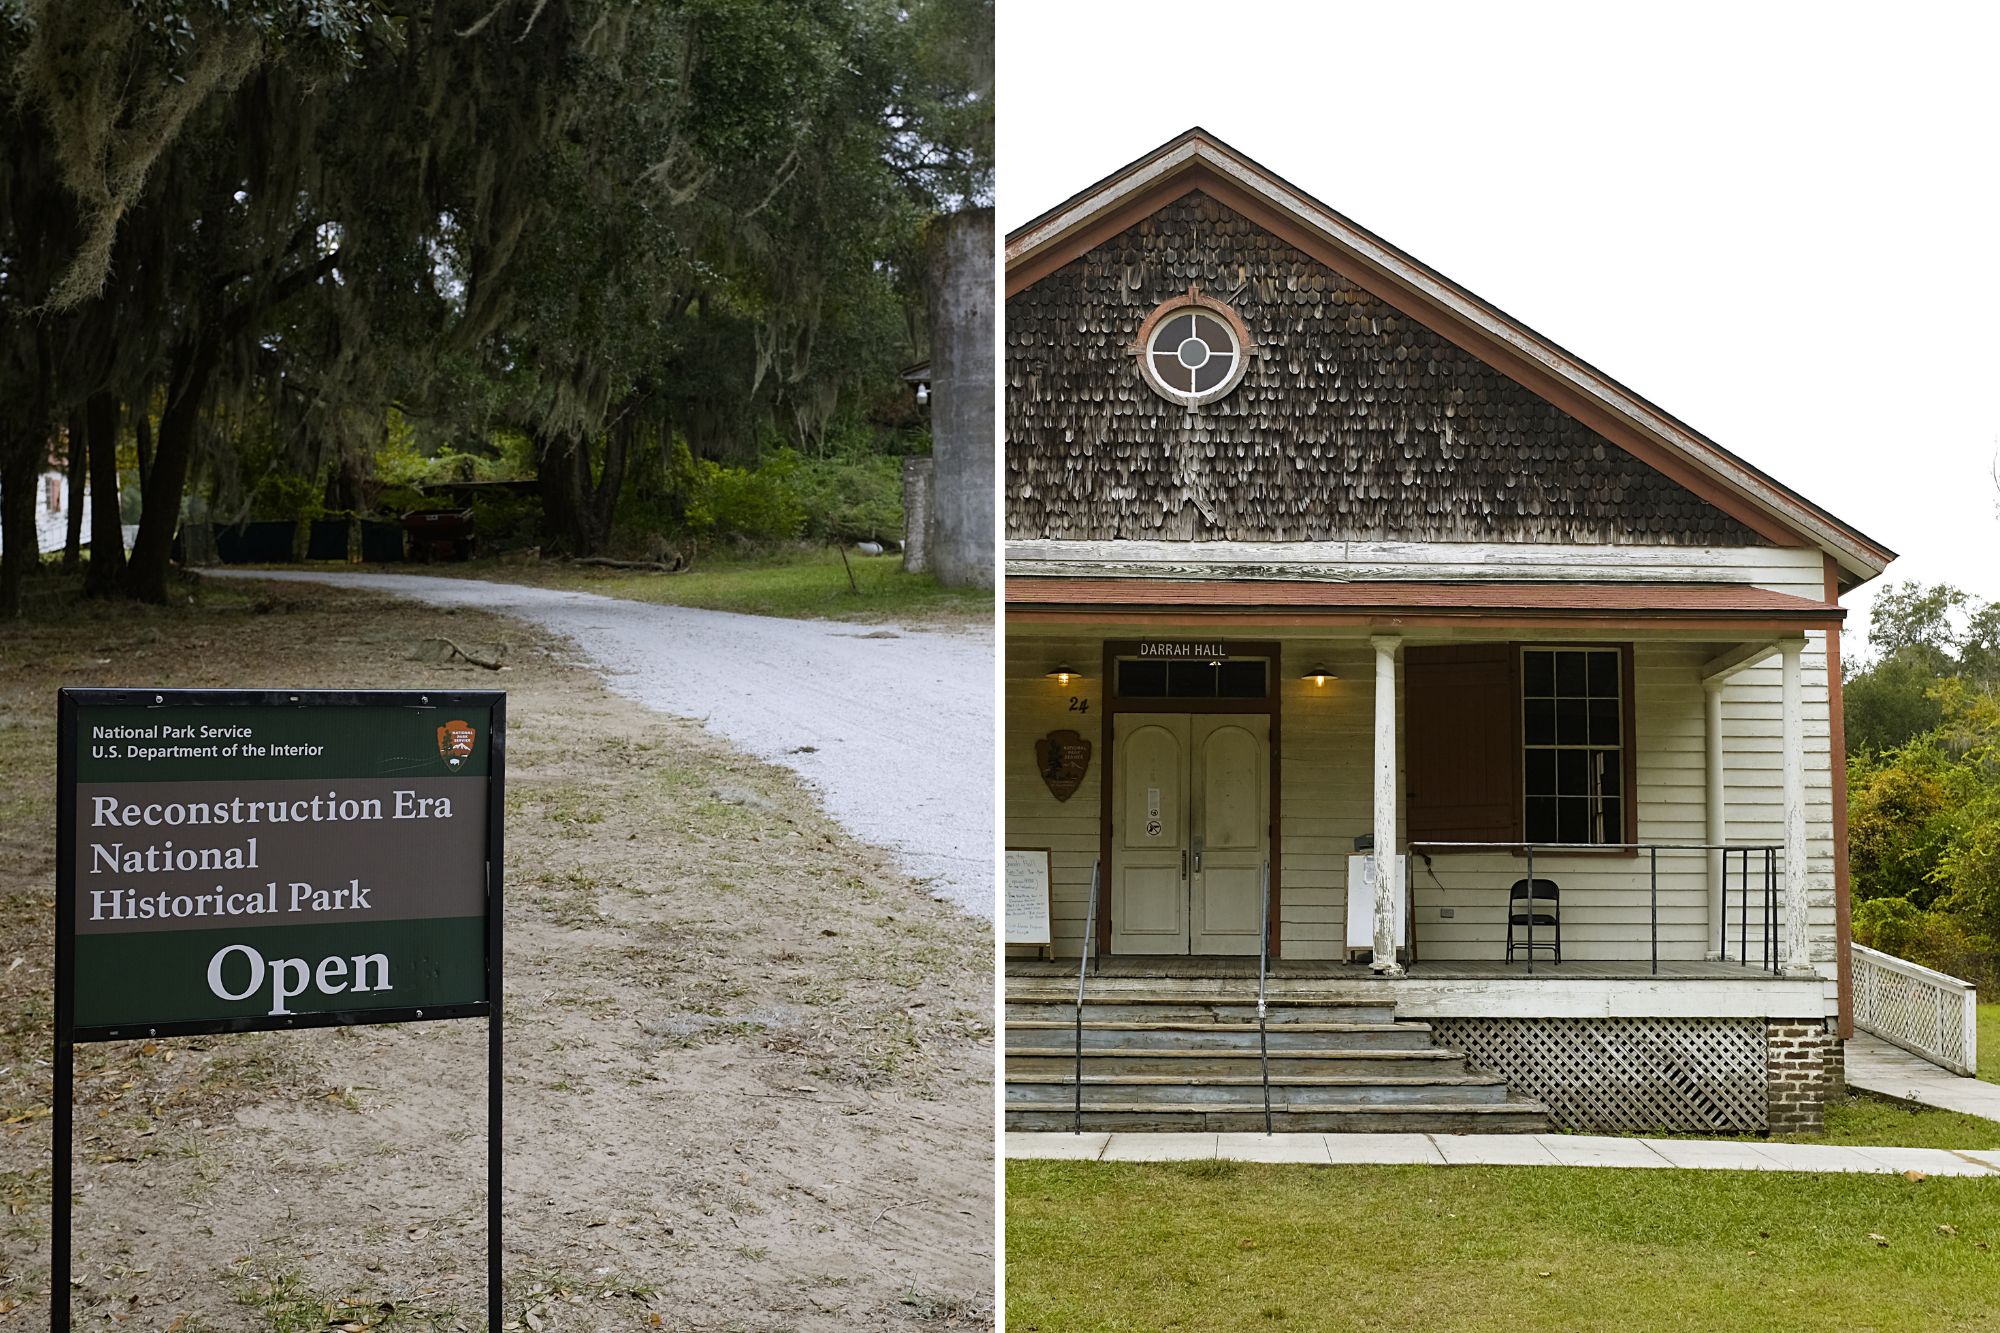 images of the Reconstruction Era National Historical Park in St. Helena